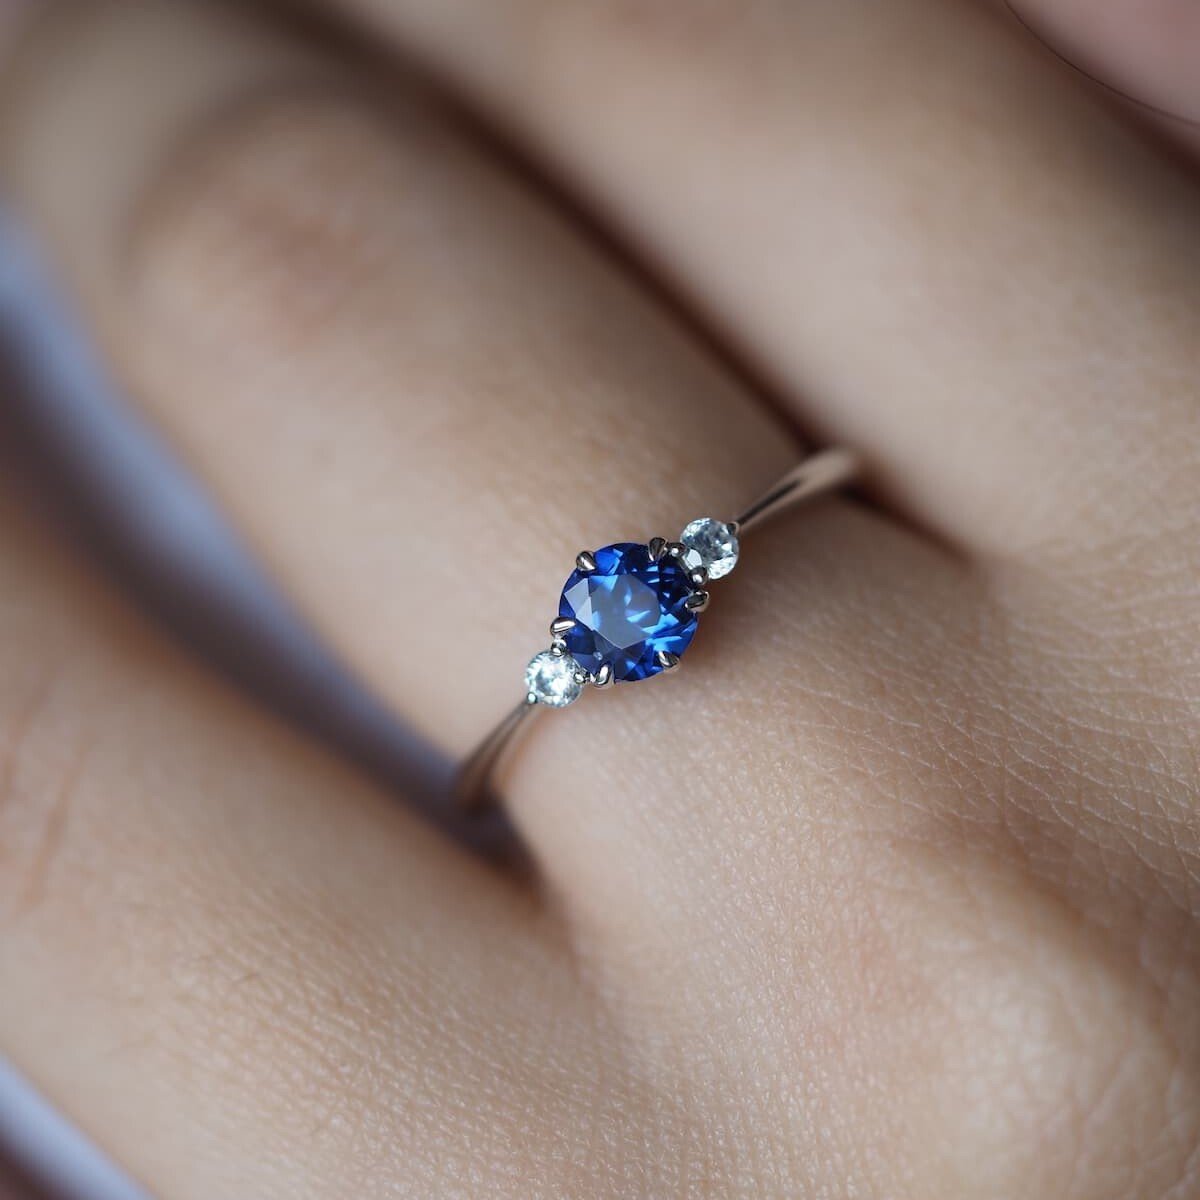 Buy the Natural Blue Sapphire in Yellow Gold Ring at our Online Store –  Diana Vincent Jewelry Designs